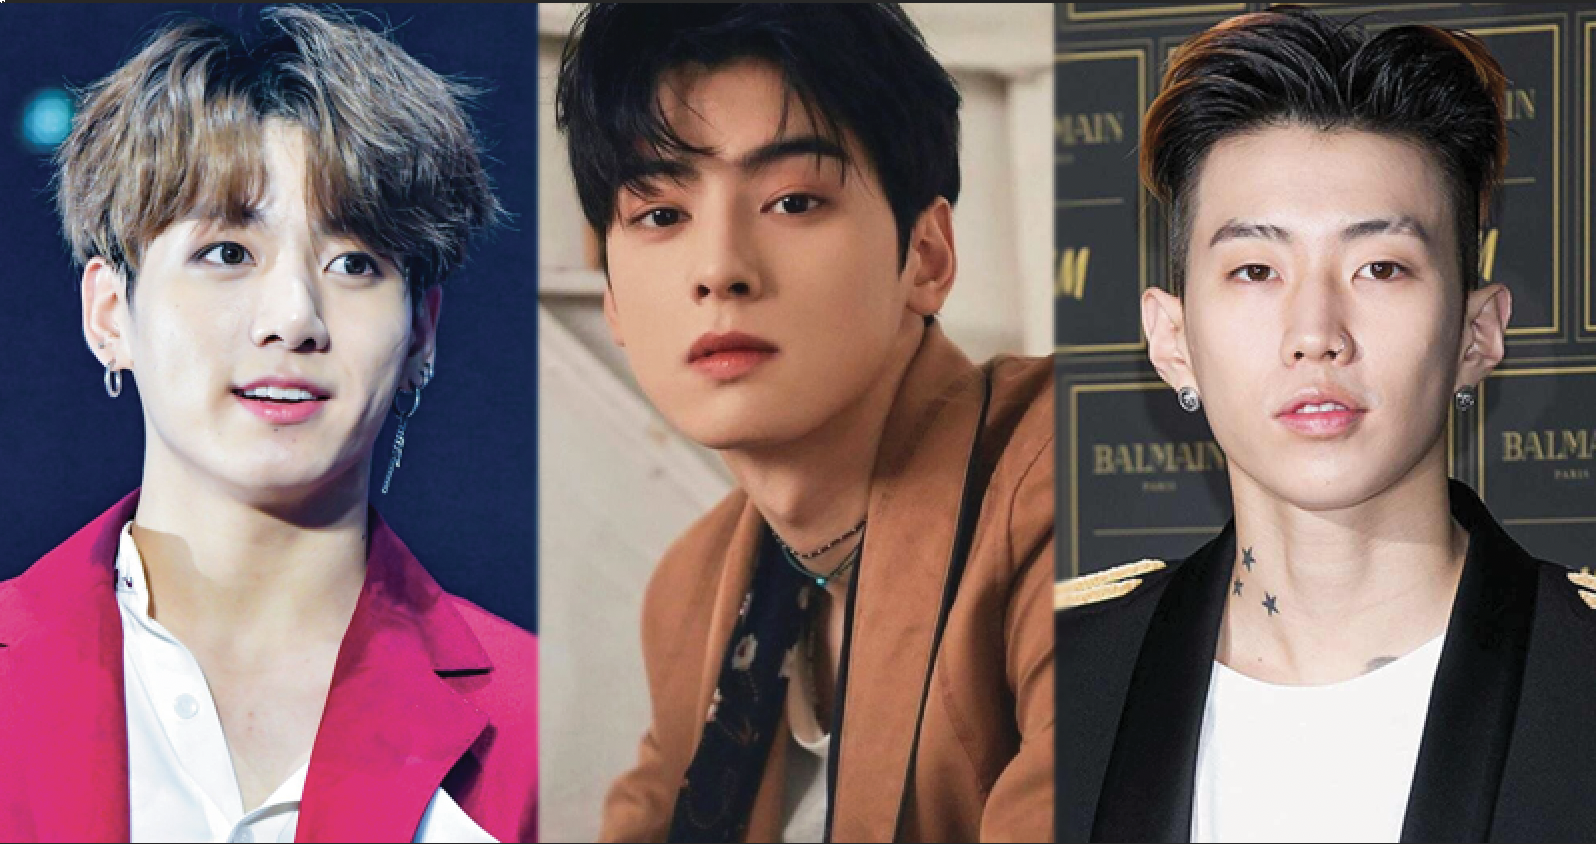 Top 15 Most-Searched Male Idols On YouTube Worldwide For The 1st Half Of 2021